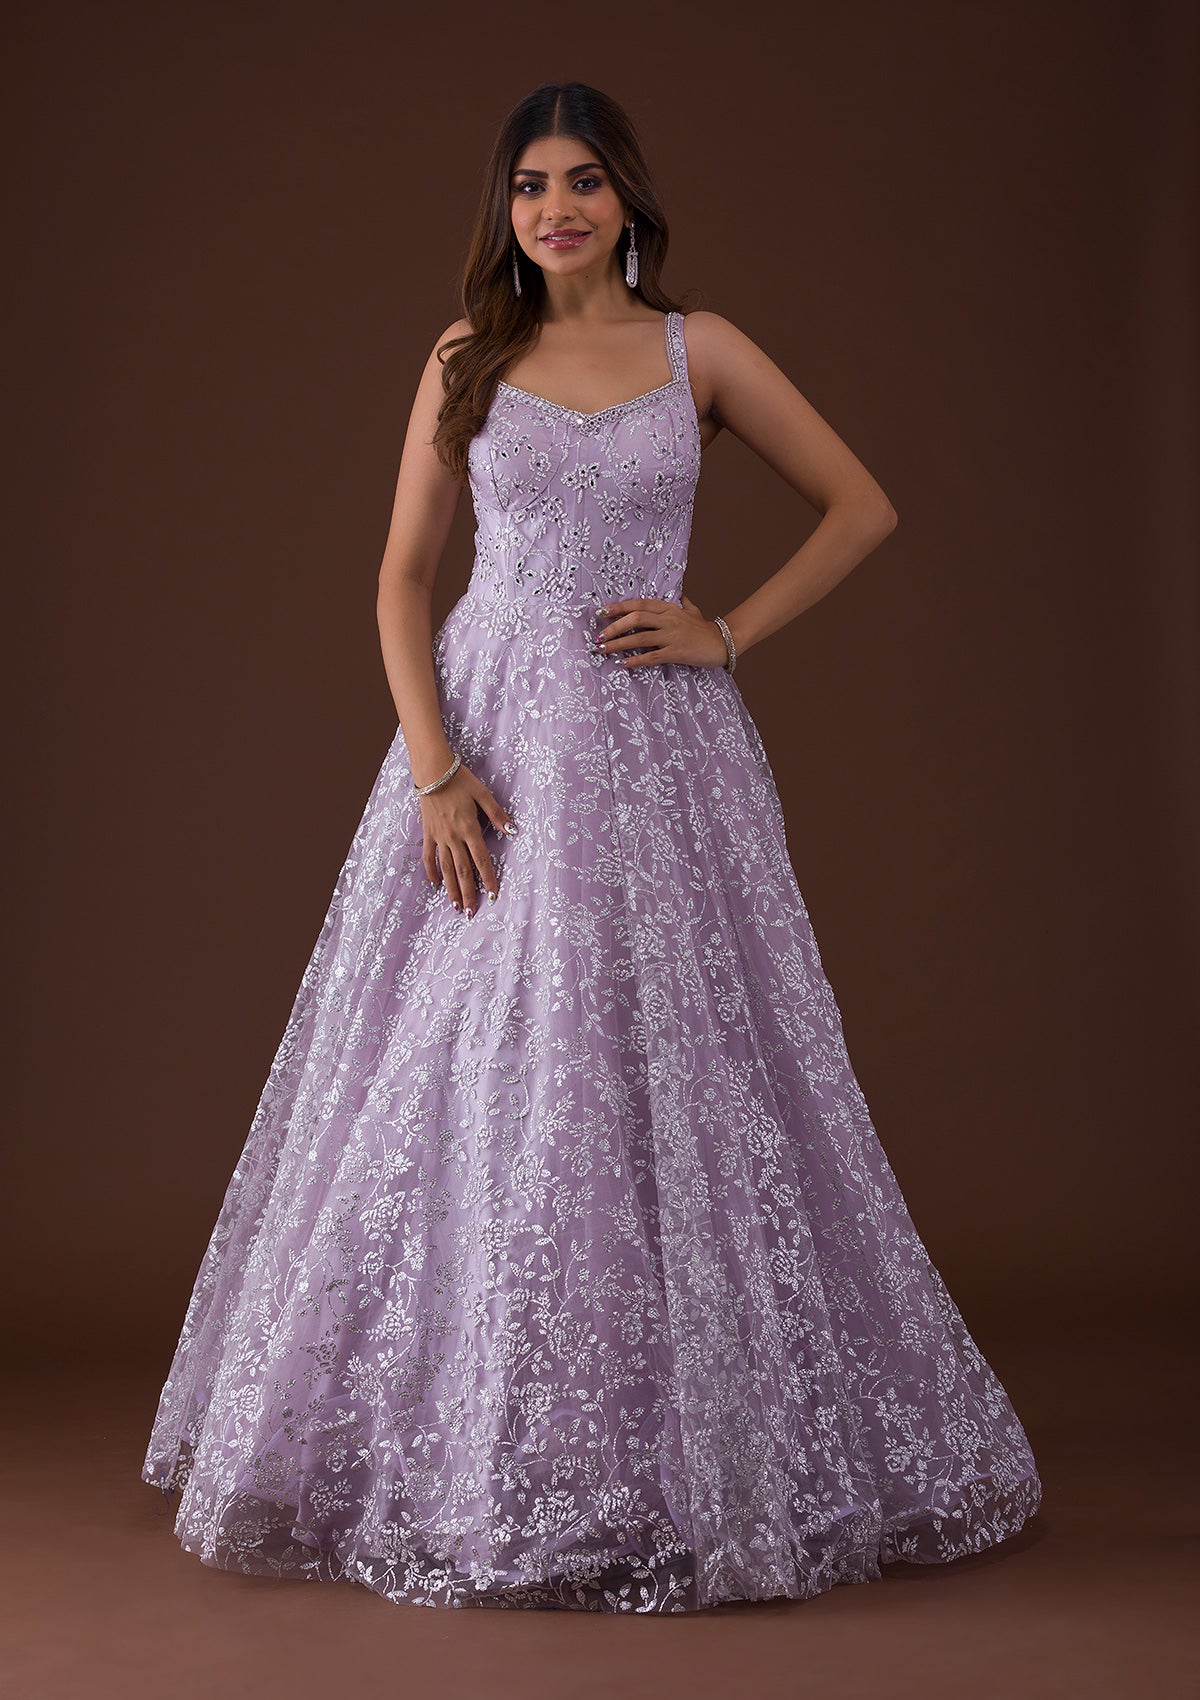 60191 Short Lace and Chiffon Bridesmaids Dress in a lovely lavender color.  The illusion neckline and knee-length s… | Бальные длинные платья, Платья,  Длинные платья